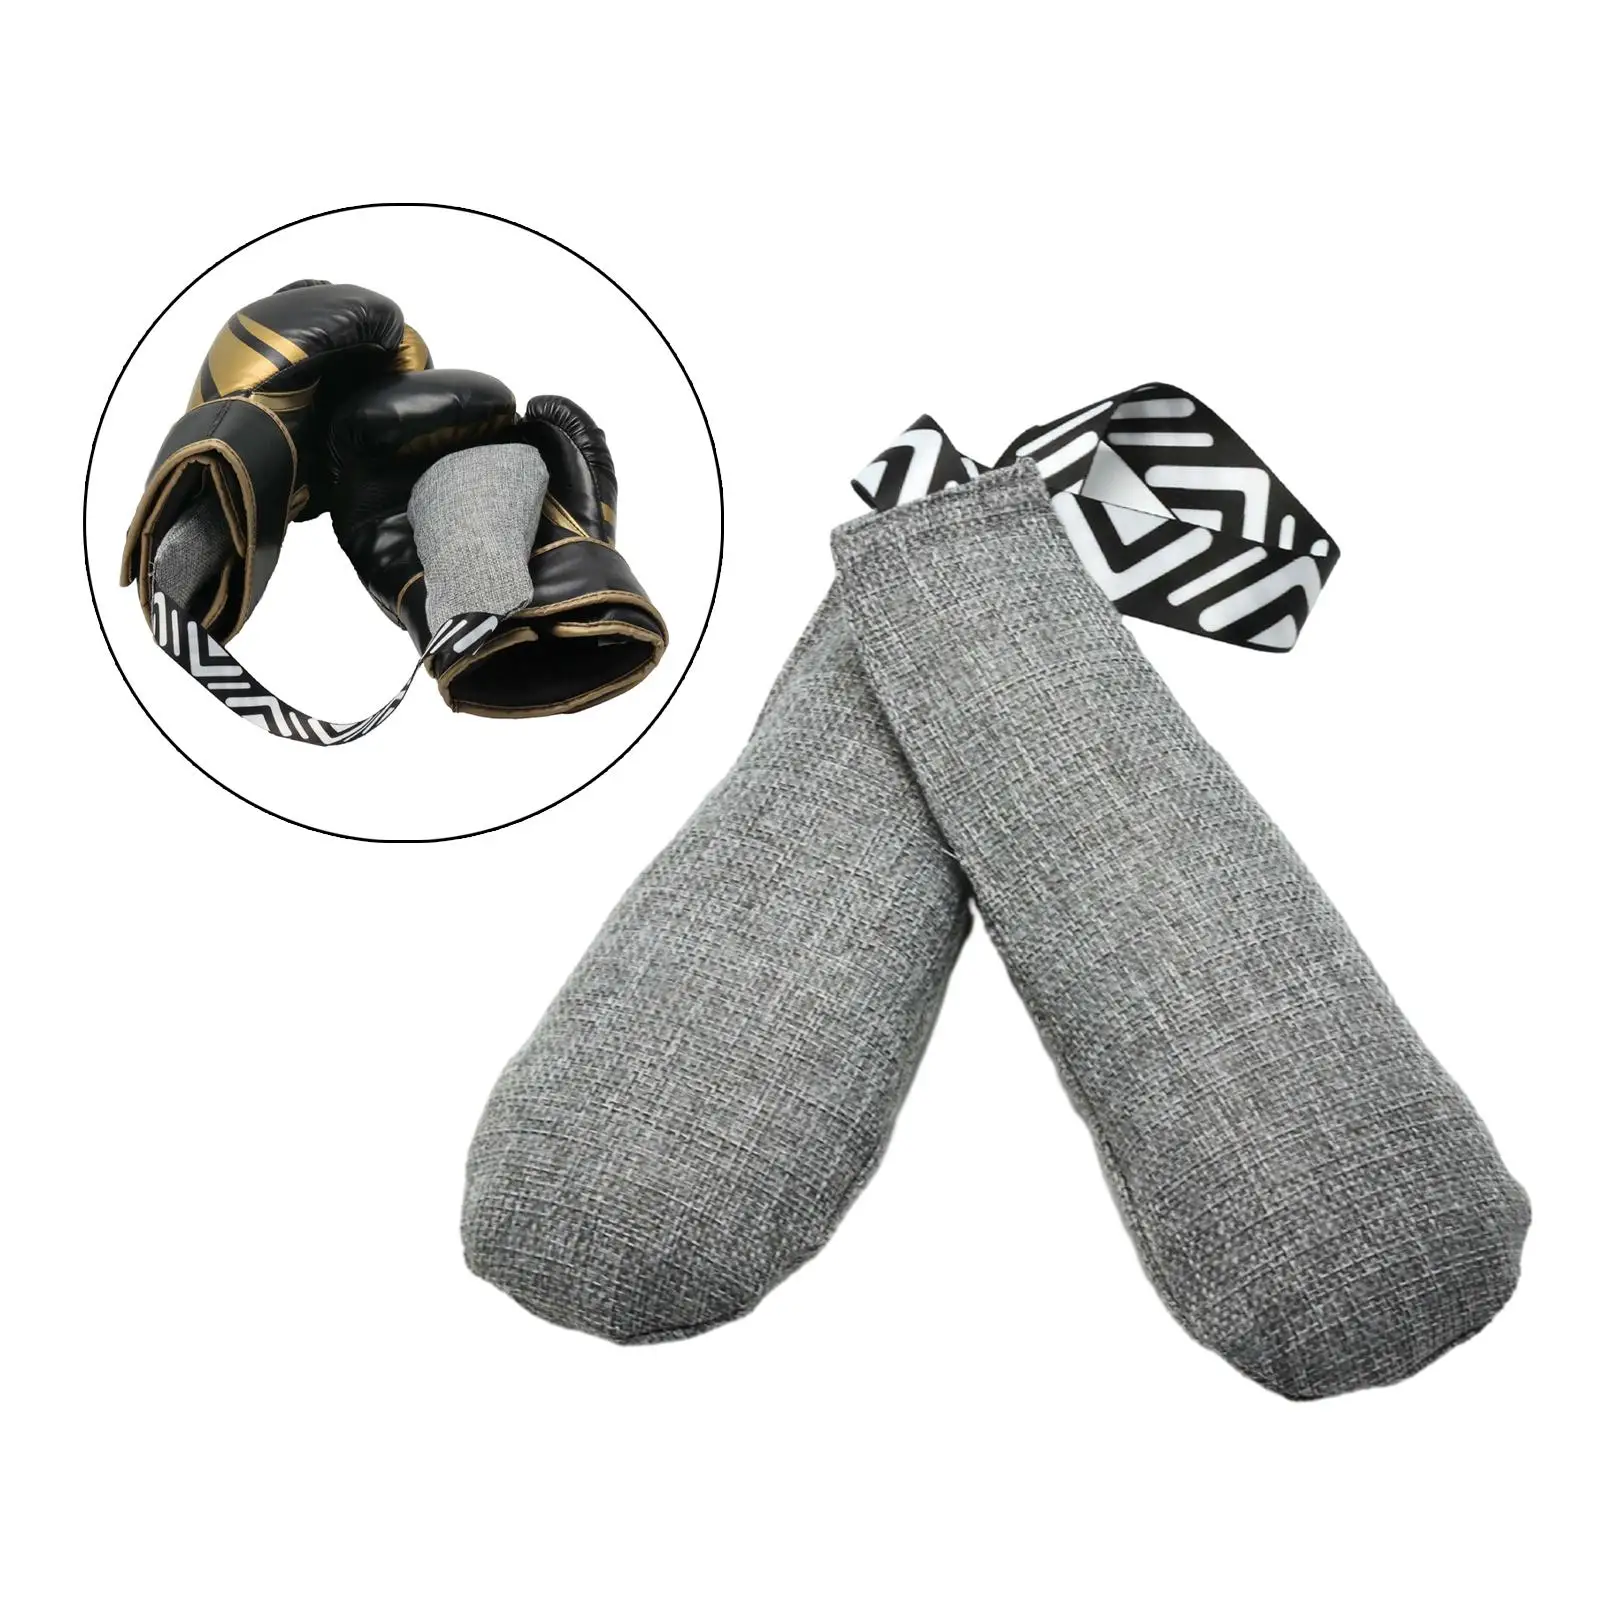 Boxing Gloves Cleaning Cloth Leaves Gloves Fresh Moistures Absorbing Device for All Sports Gloves Baseball Ski Bowling Football